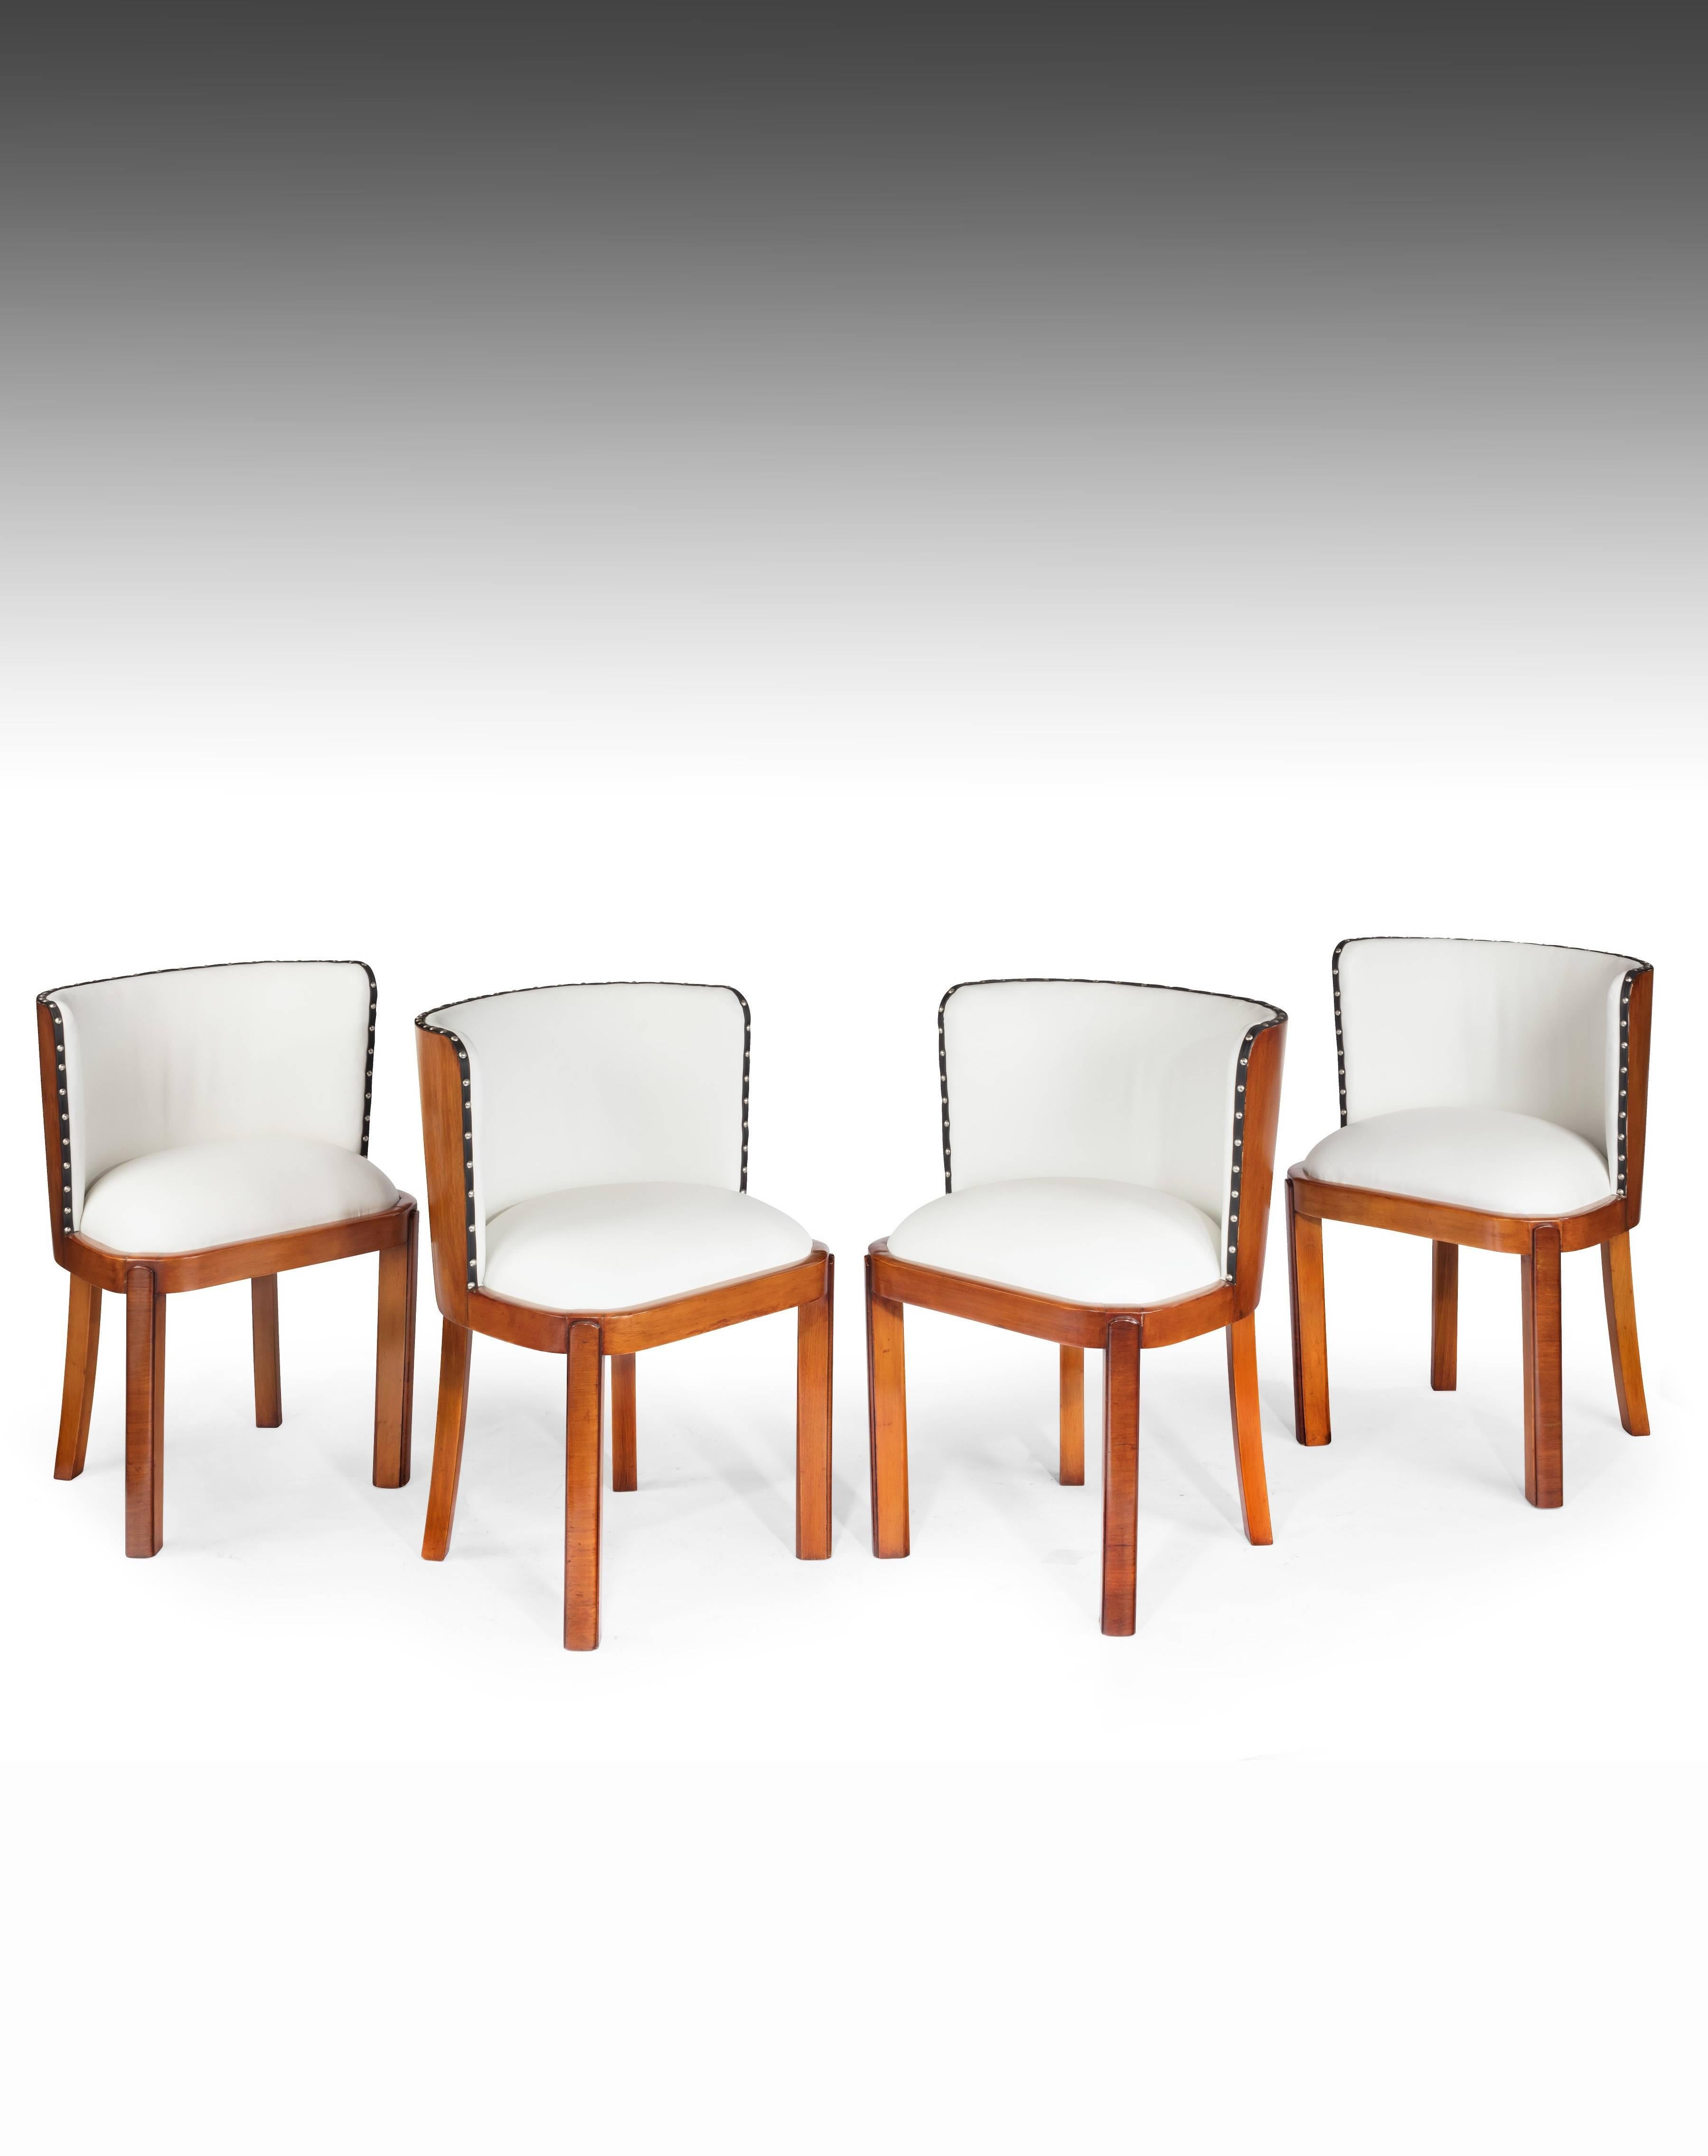 A very stylish set of four walnut white leather upholstered Art Deco shaped dining chairs.
This set of four very unique Art Deco dining chairs have walnut veneered tub shaped backs which are upholstered in a Fine quality white leather hide with a